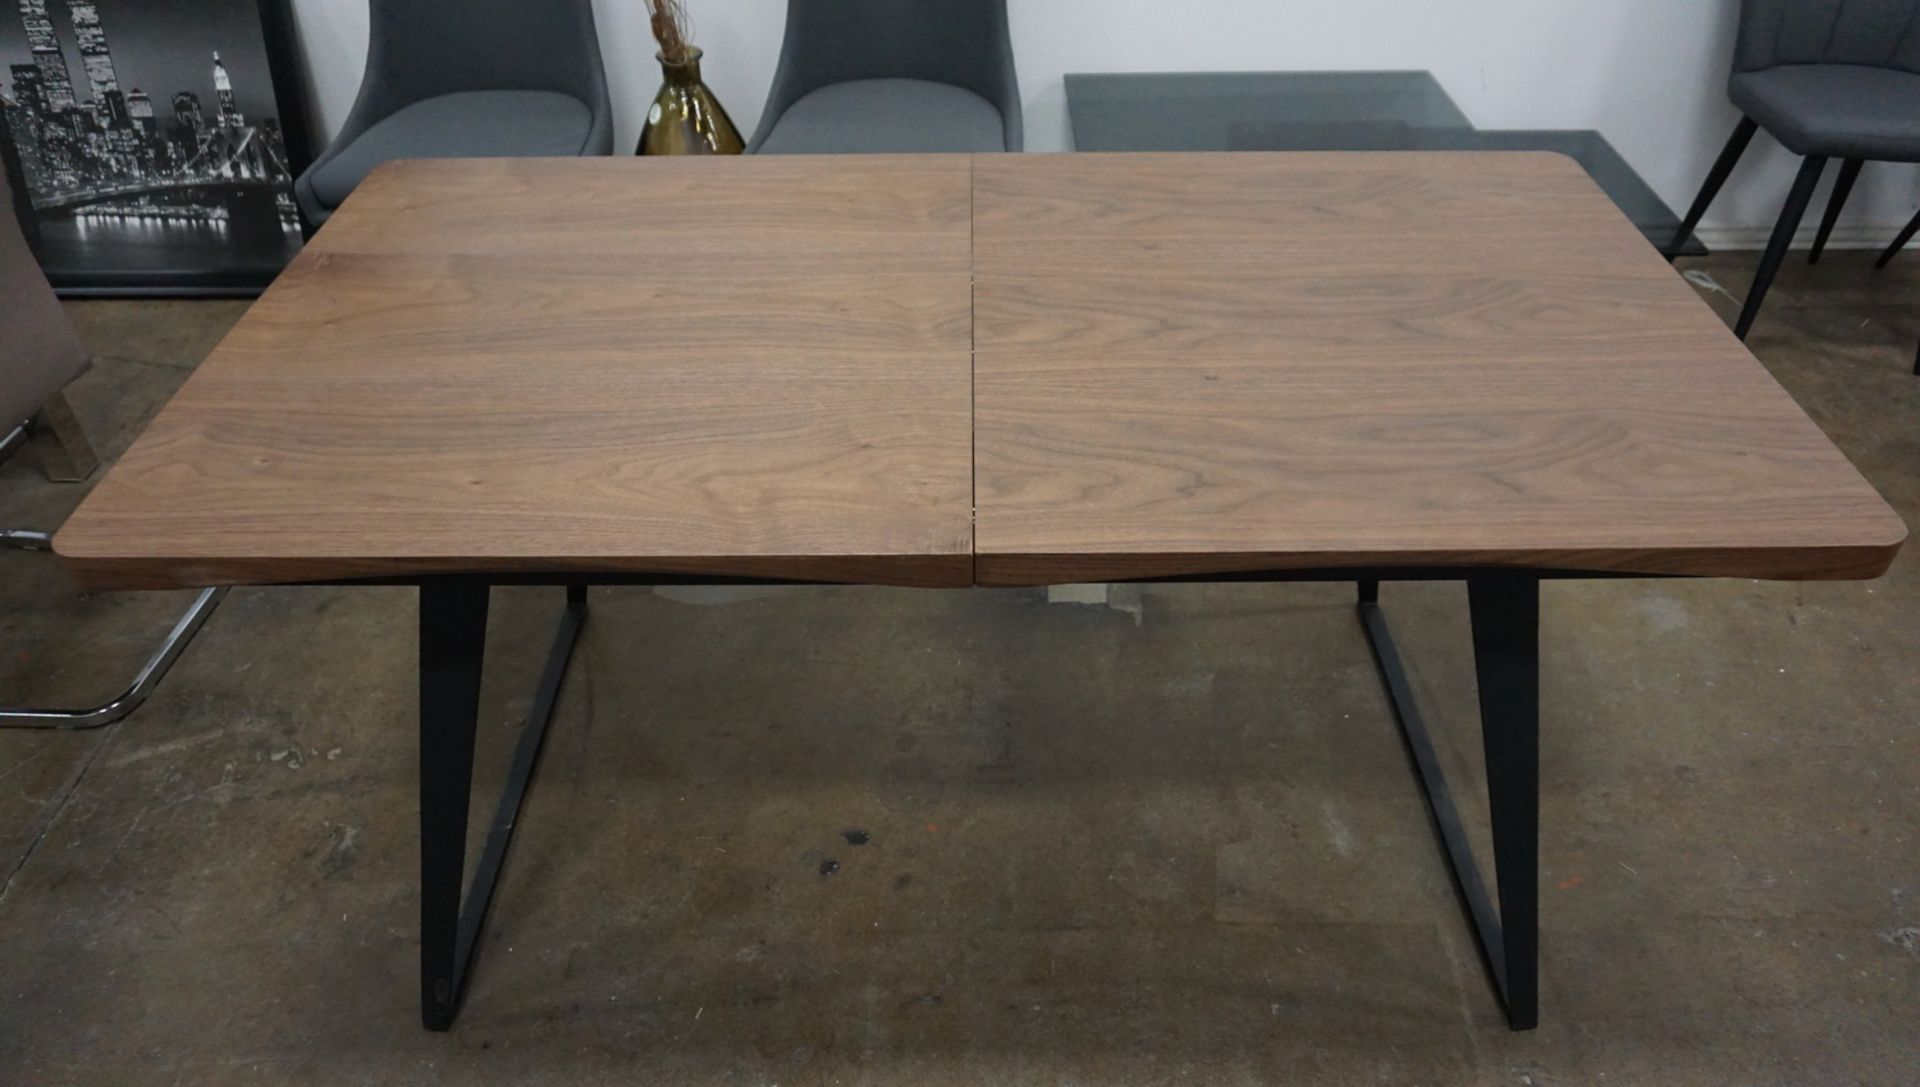 WOOD VENEER APPROX. 59"L X 39.5"W X 30"H EXTENDABLE DINING TABLE